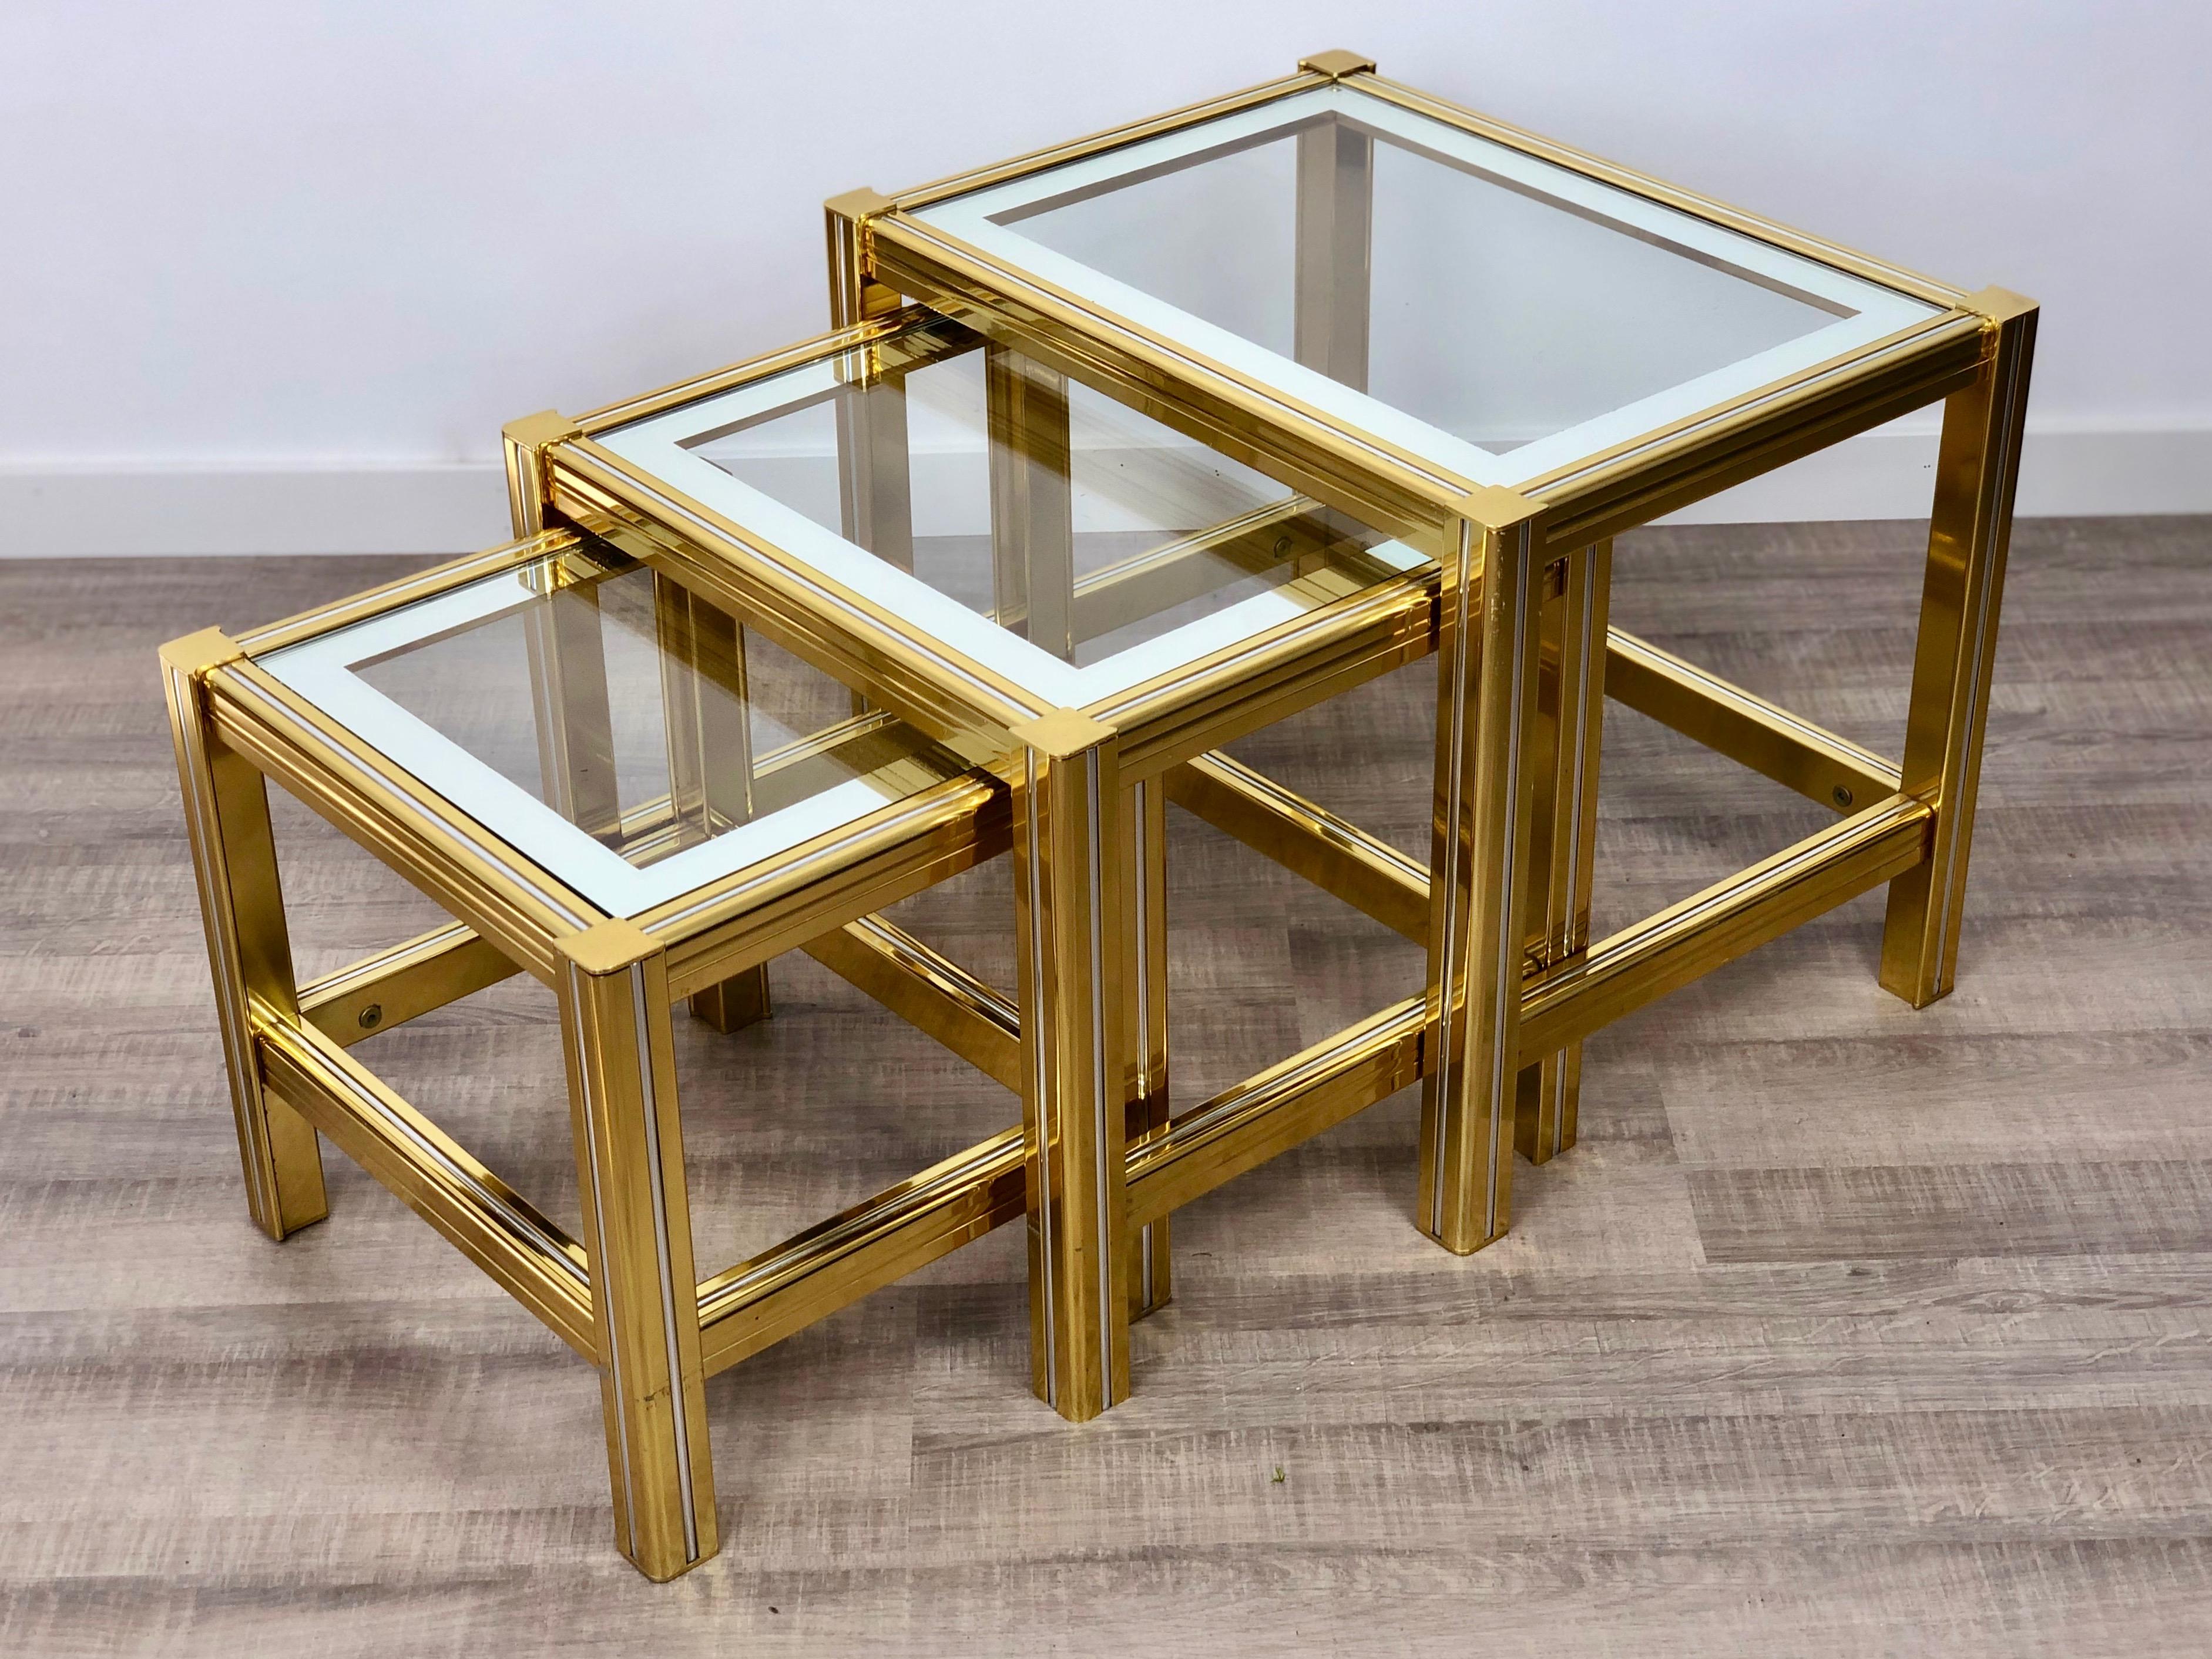 Late 20th Century Tris of Increasing Dimensions Side Coffe Table in Brass, Glass and Chrome, 1970s For Sale